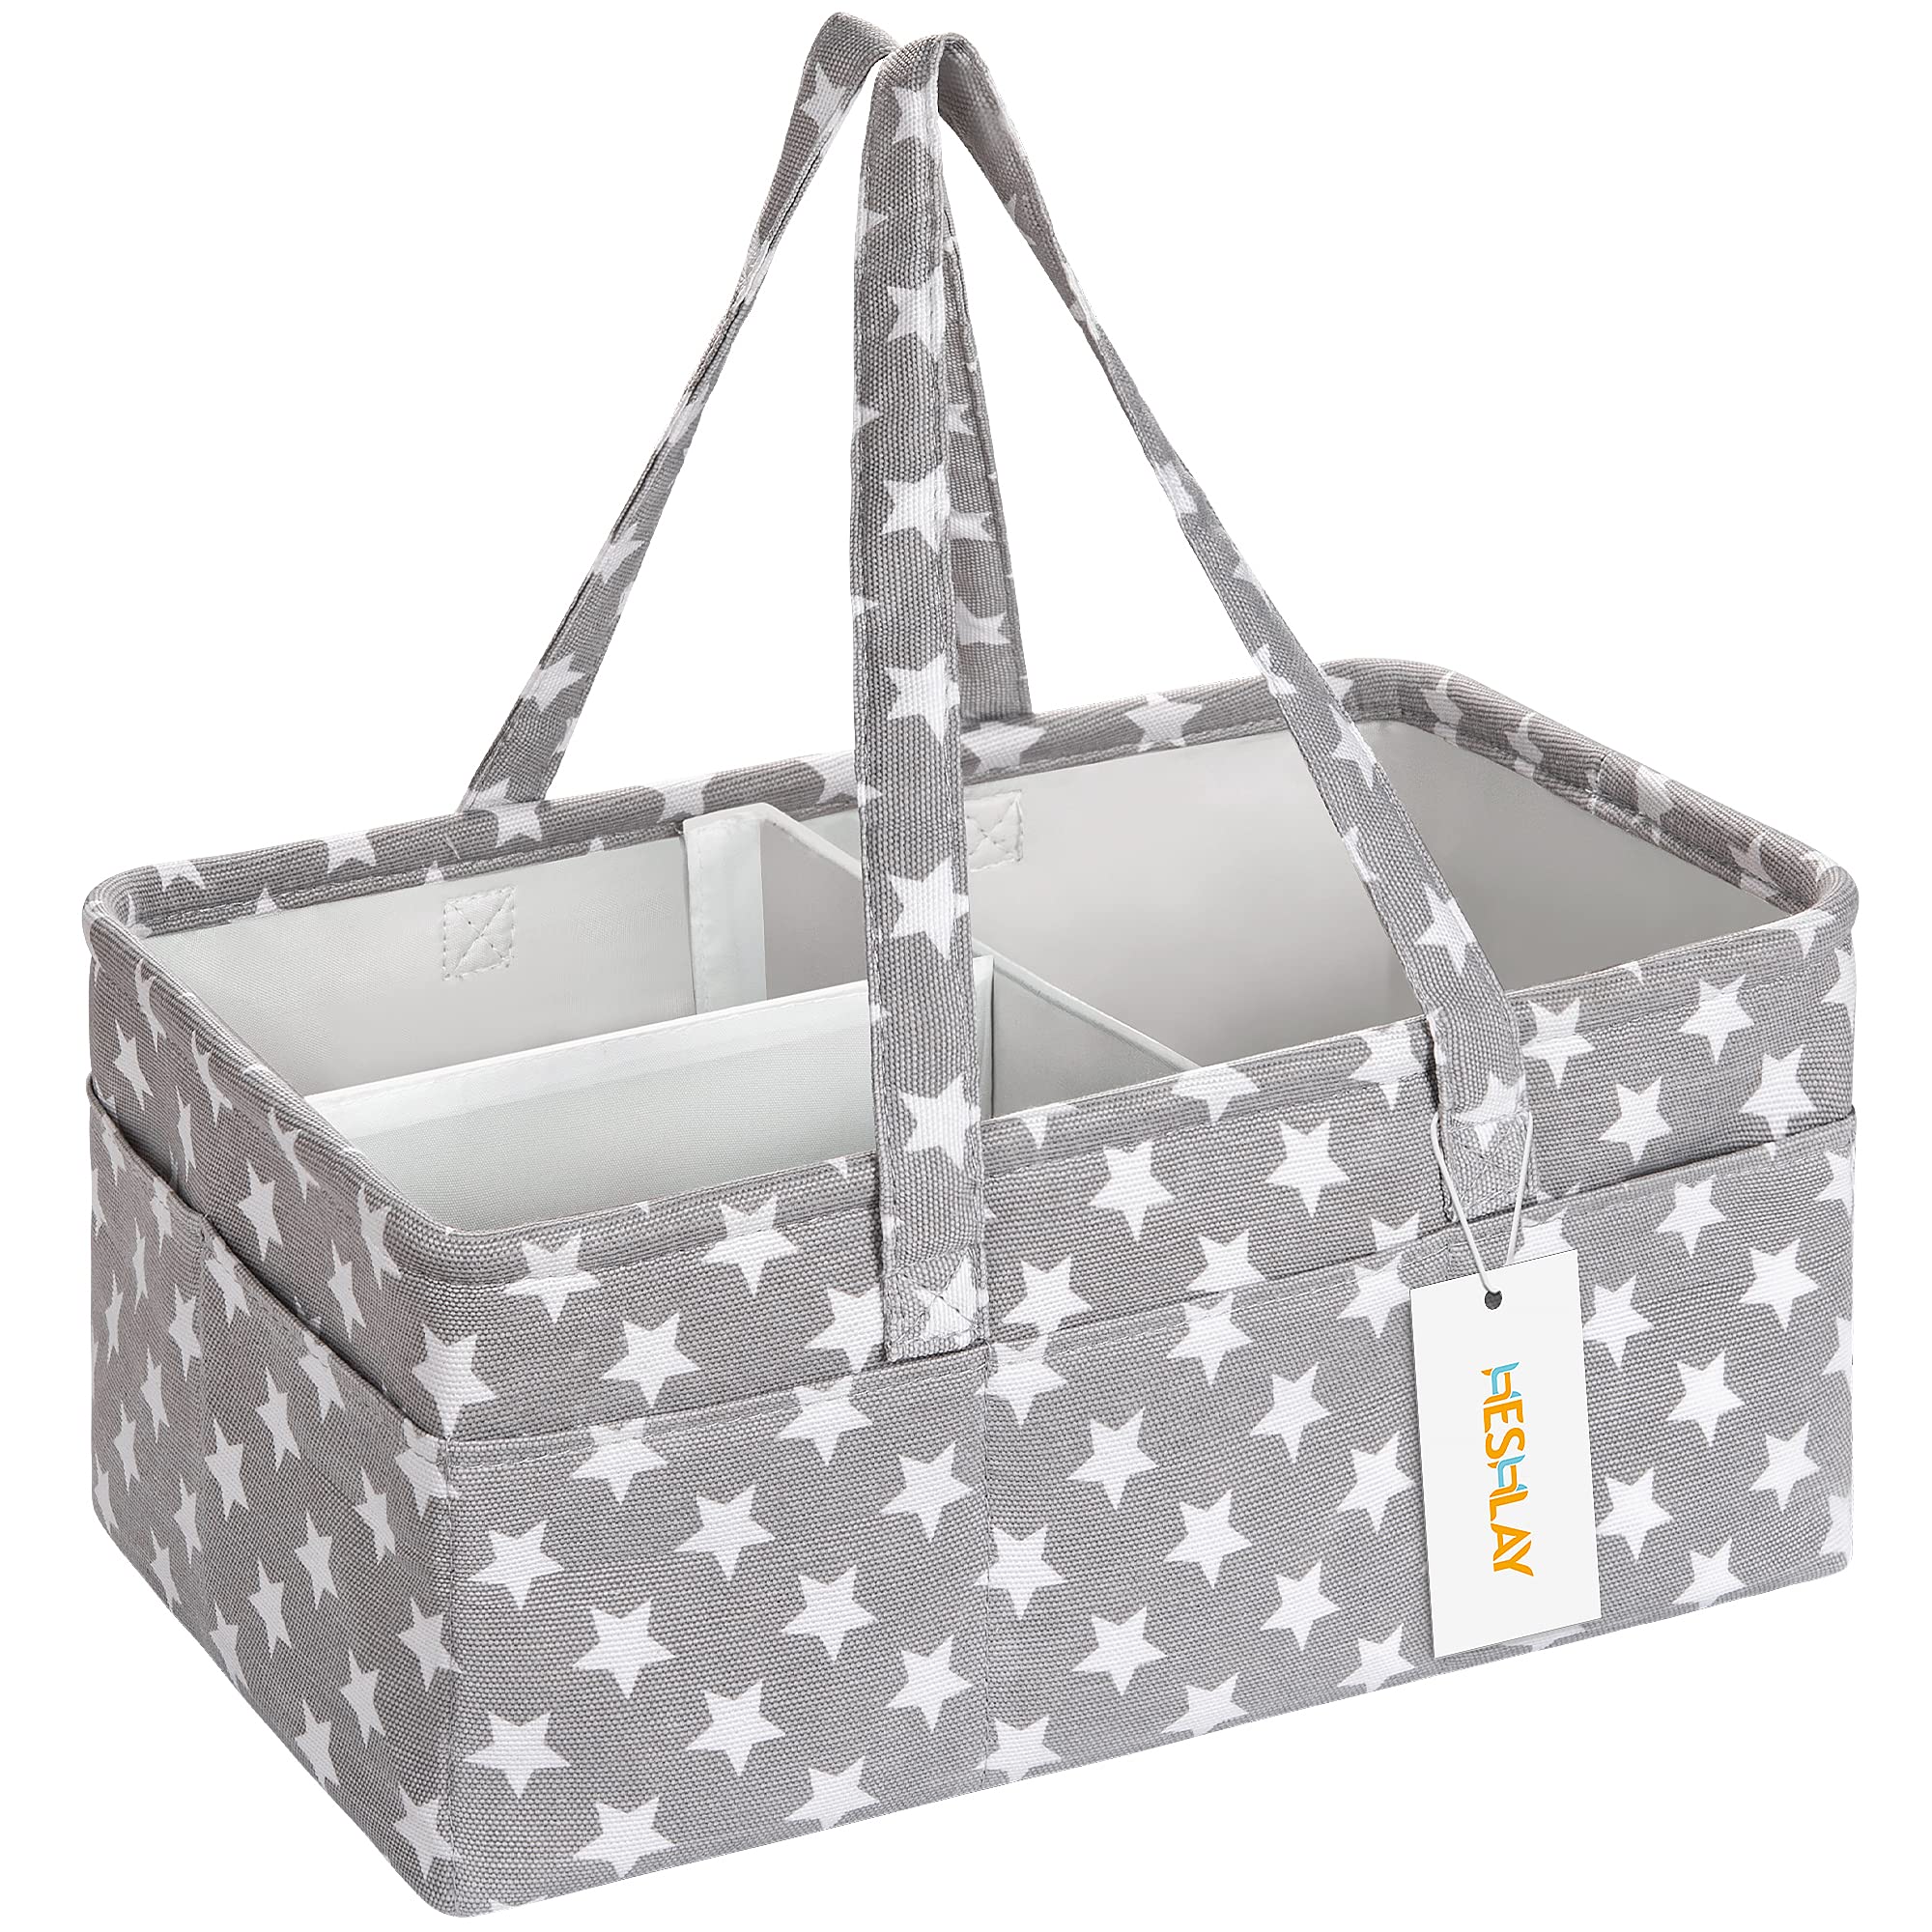 Heshlay Nappy Caddy - Sturdy Baby Diaper Caddy Organiser with Waterproof EVA on Polyester - Bag Storage for Storing Maximum Baby Supplies (Grey)